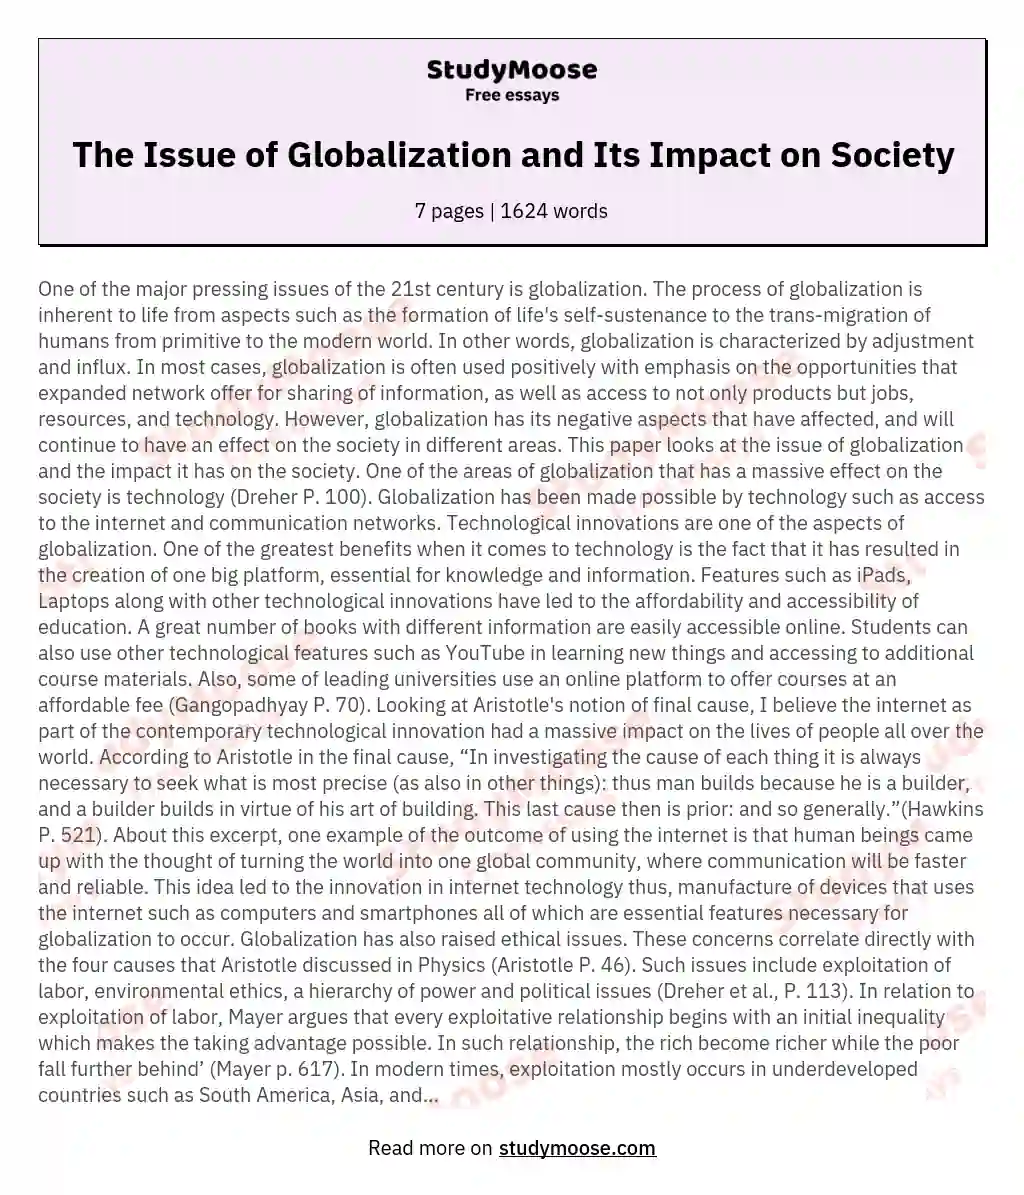 The Issue of Globalization and Its Impact on Society essay